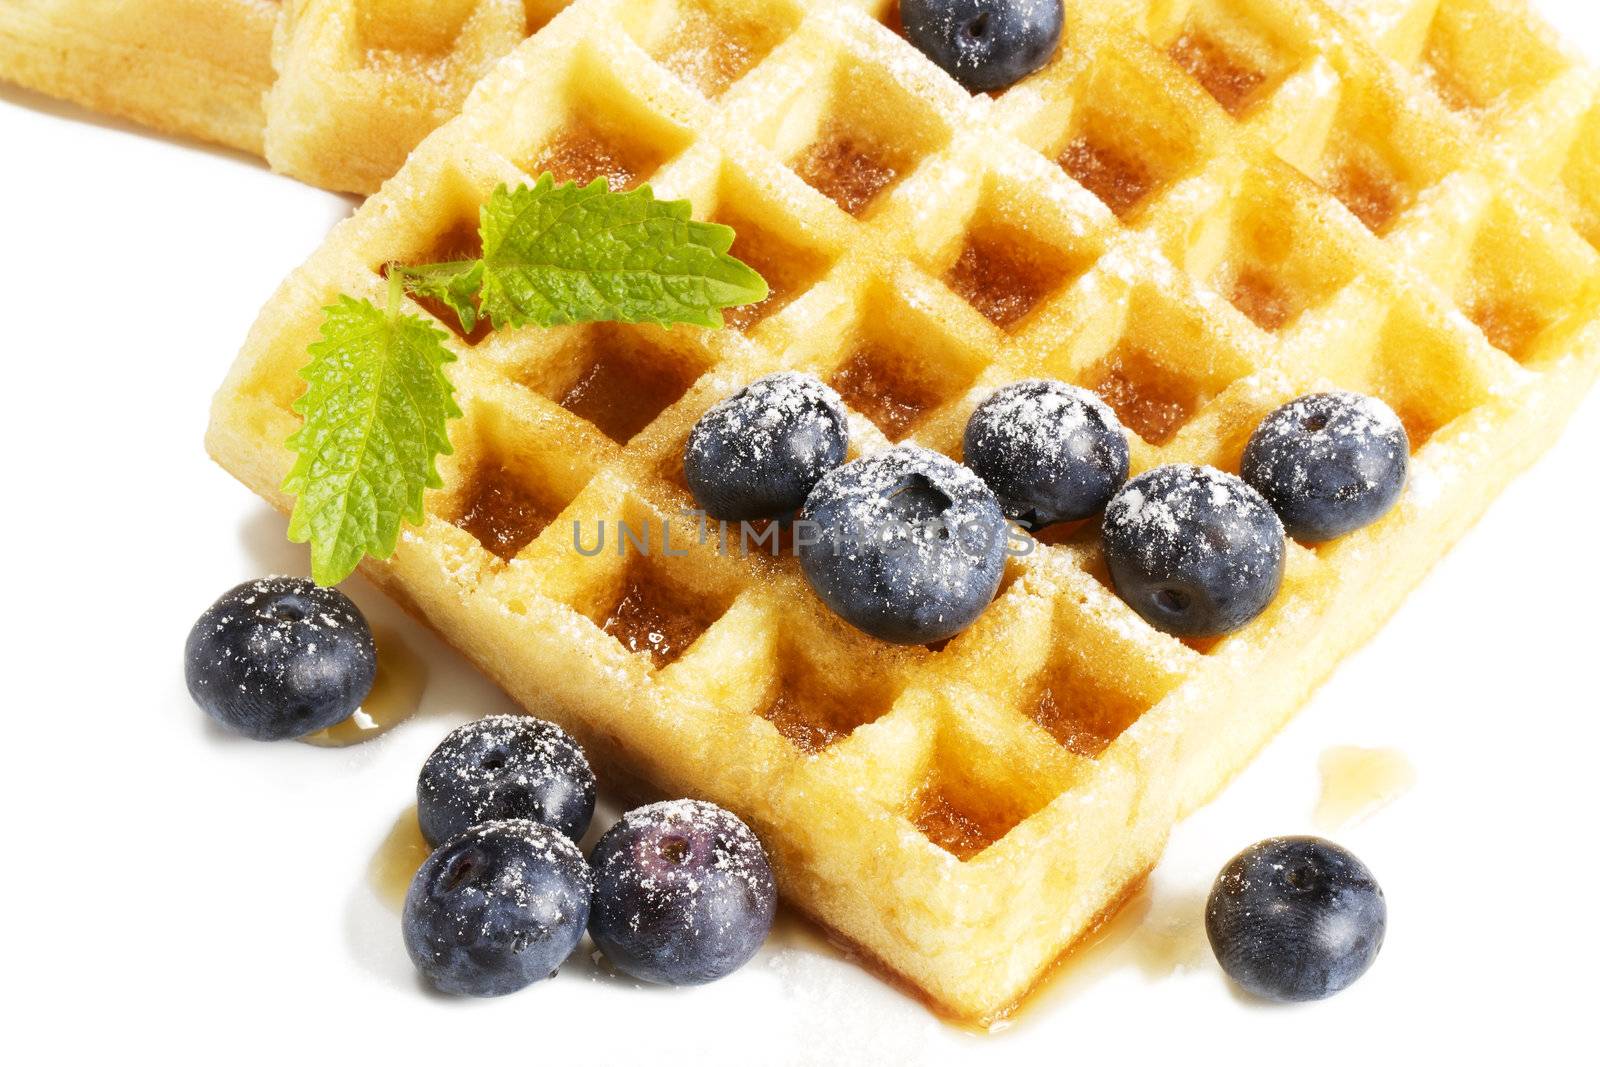 waffles with sugar covered blueberries melisss and syrup from top on white background